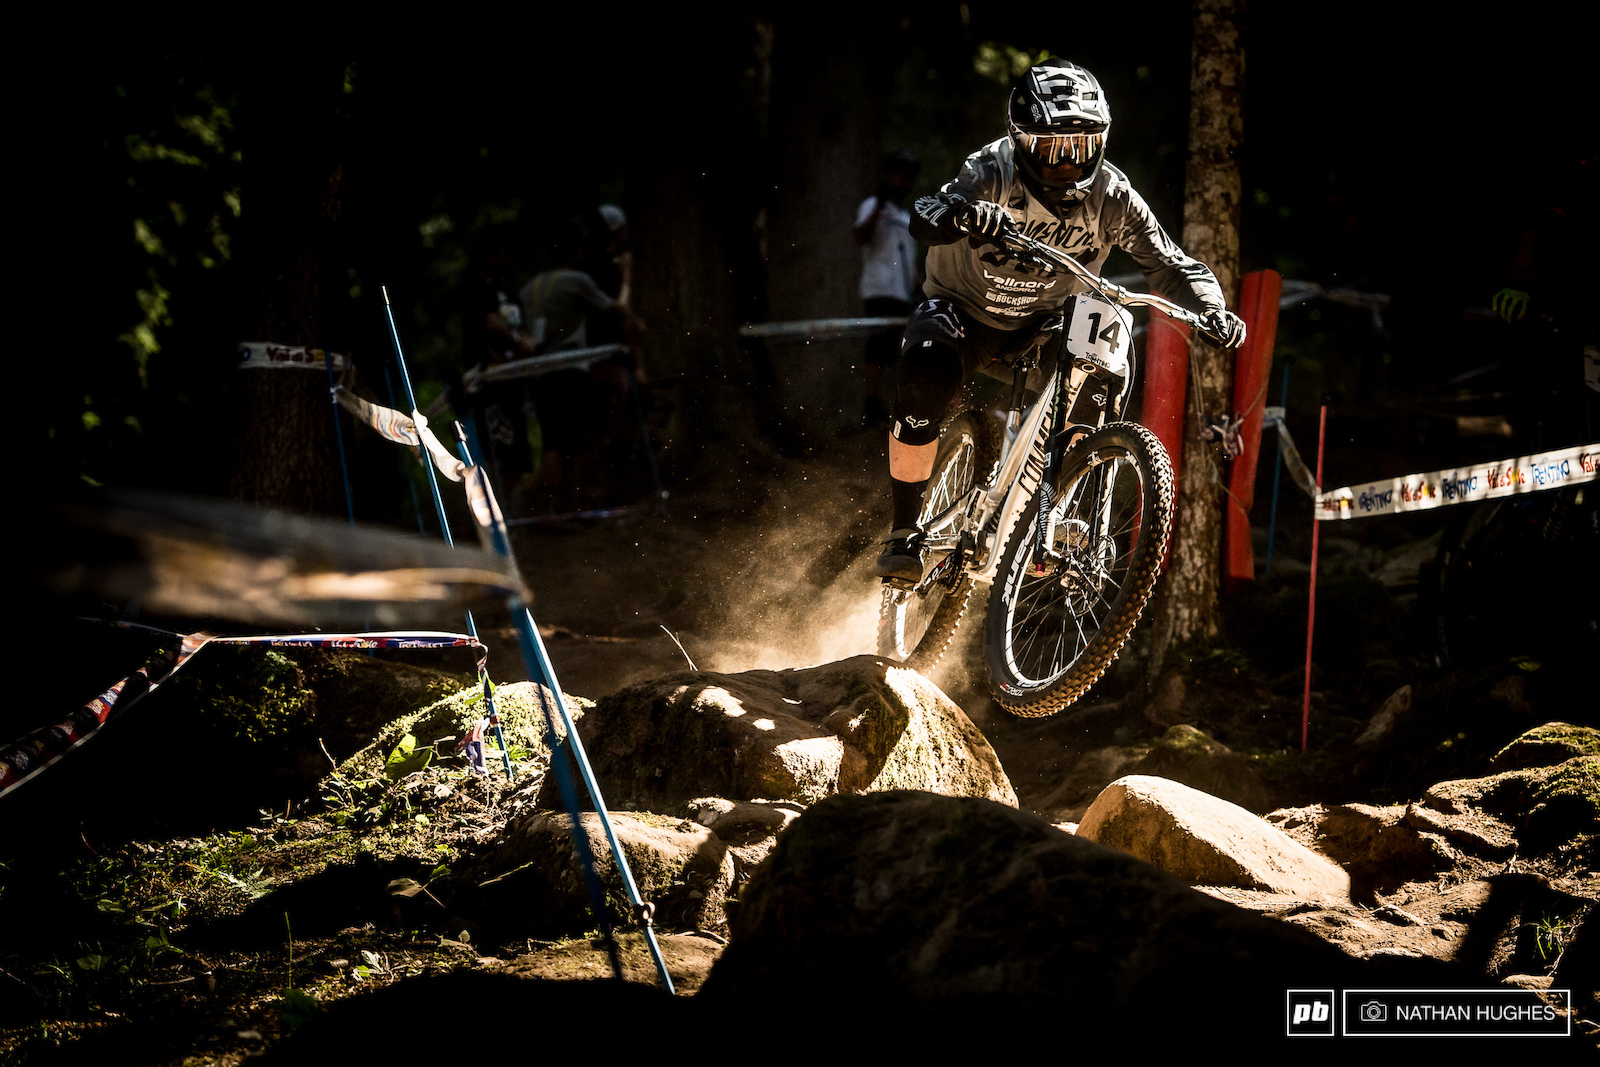 Brannigan hurtling through beams of light in the forest.